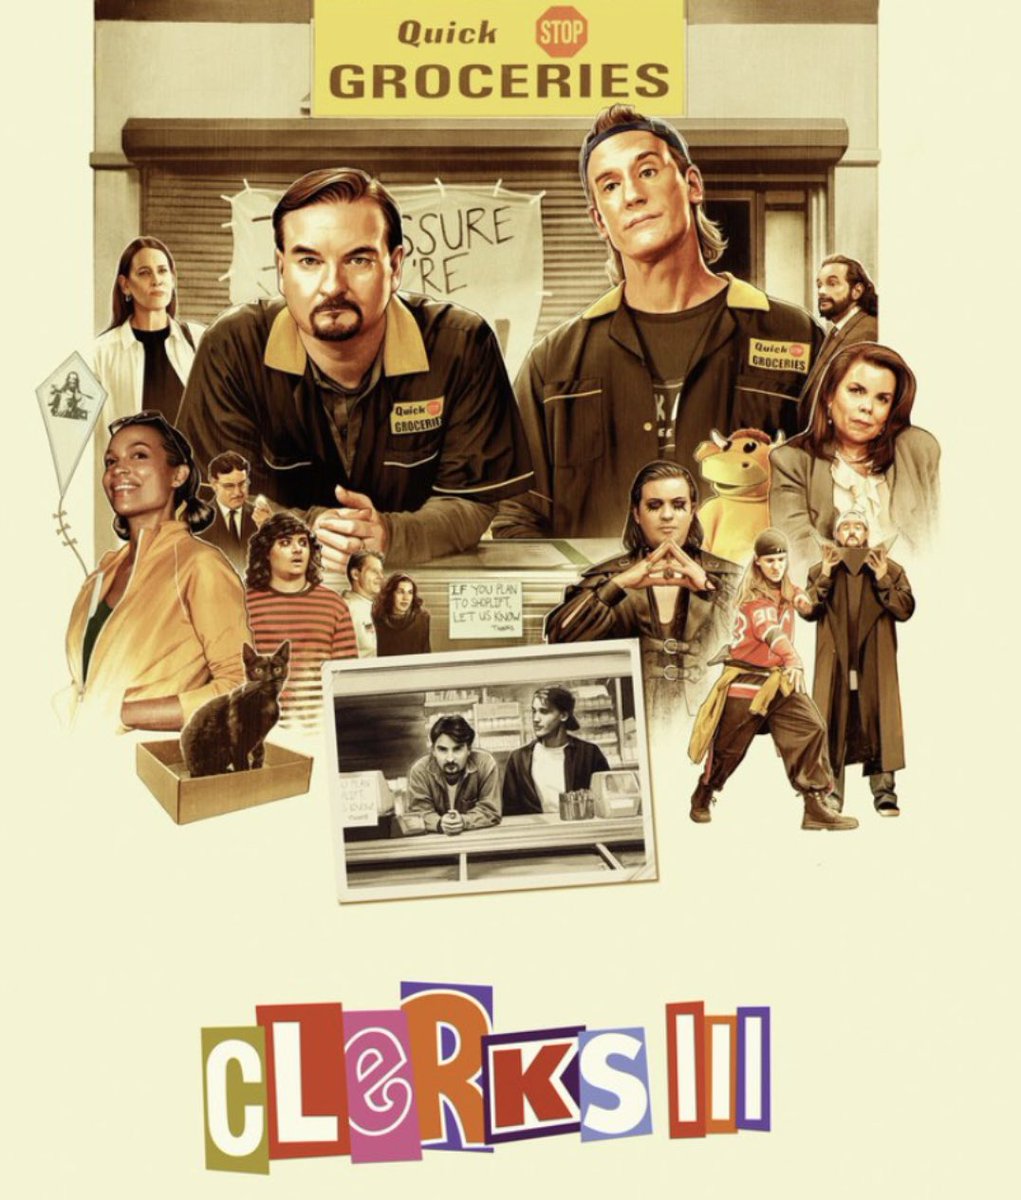 #ClerksIII Felt like an old band you used to dig playing their farewell tour. Maybe they can’t play their instruments as well as they used to, but they played with heart #MovieReviews #QuickStop #Inconvenience #ShadowframeReviews